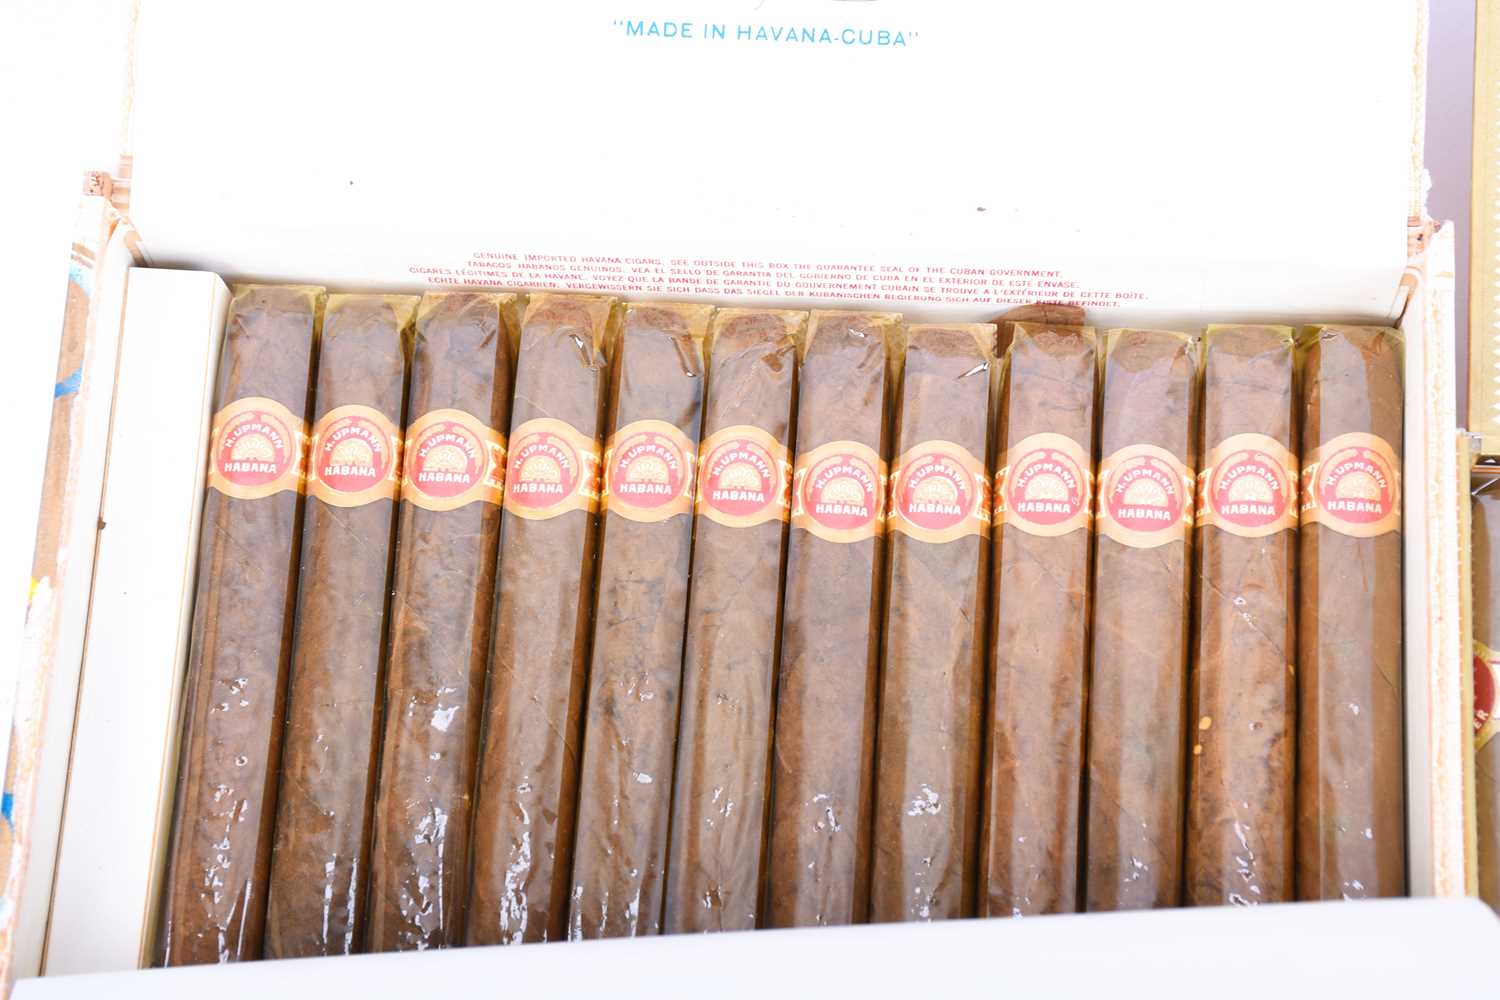 A collection of assorted cigars, including an unopened box of Quintero y Hno Cienfuegos cigars, - Image 3 of 20